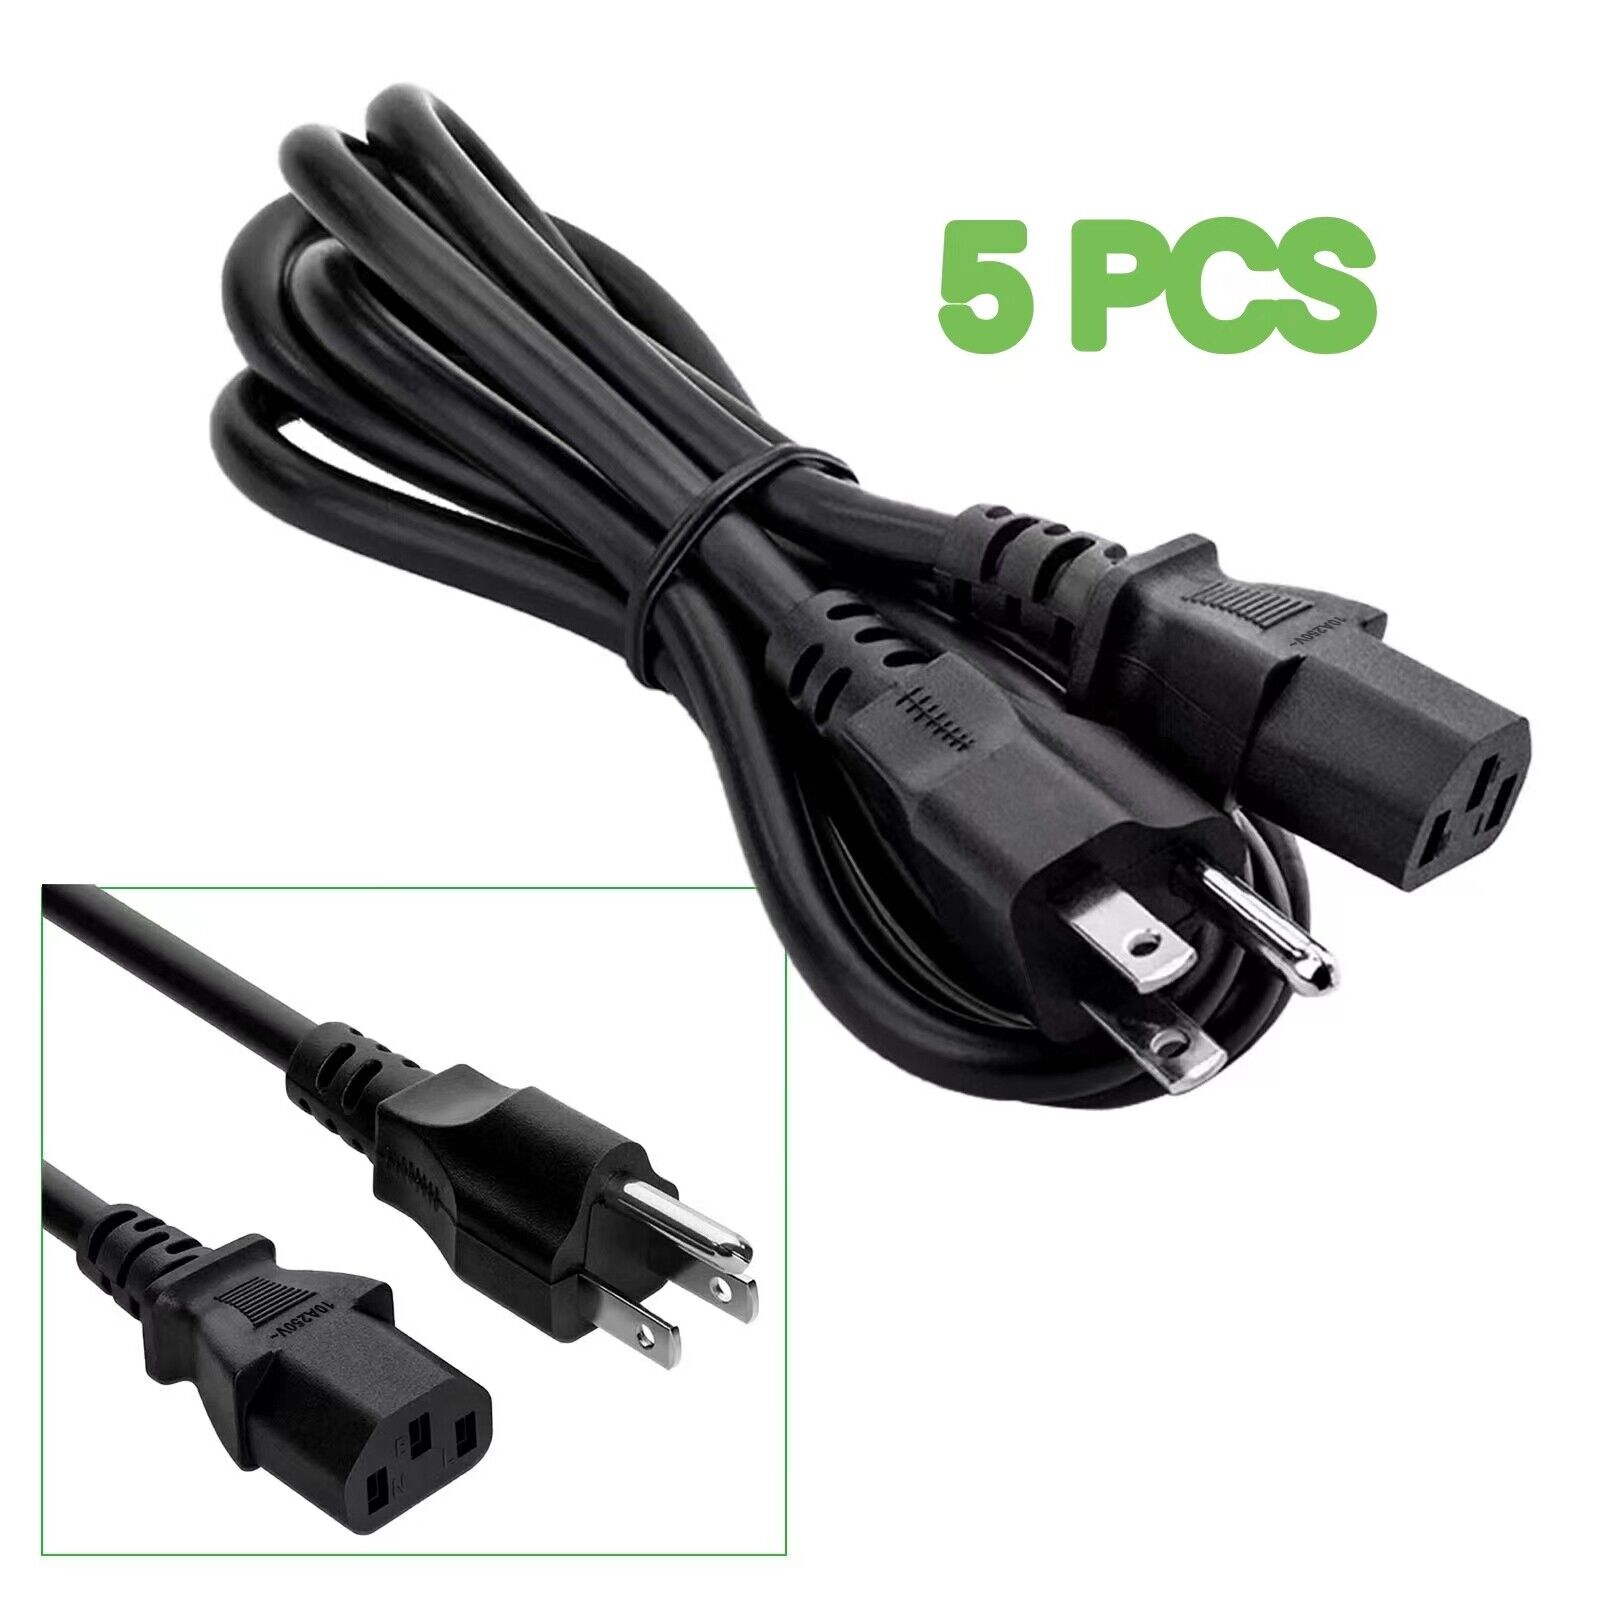 3.3ft 3 Prong AC Power Cord Cable Replacement for Desktop Computer Monitor. Lot